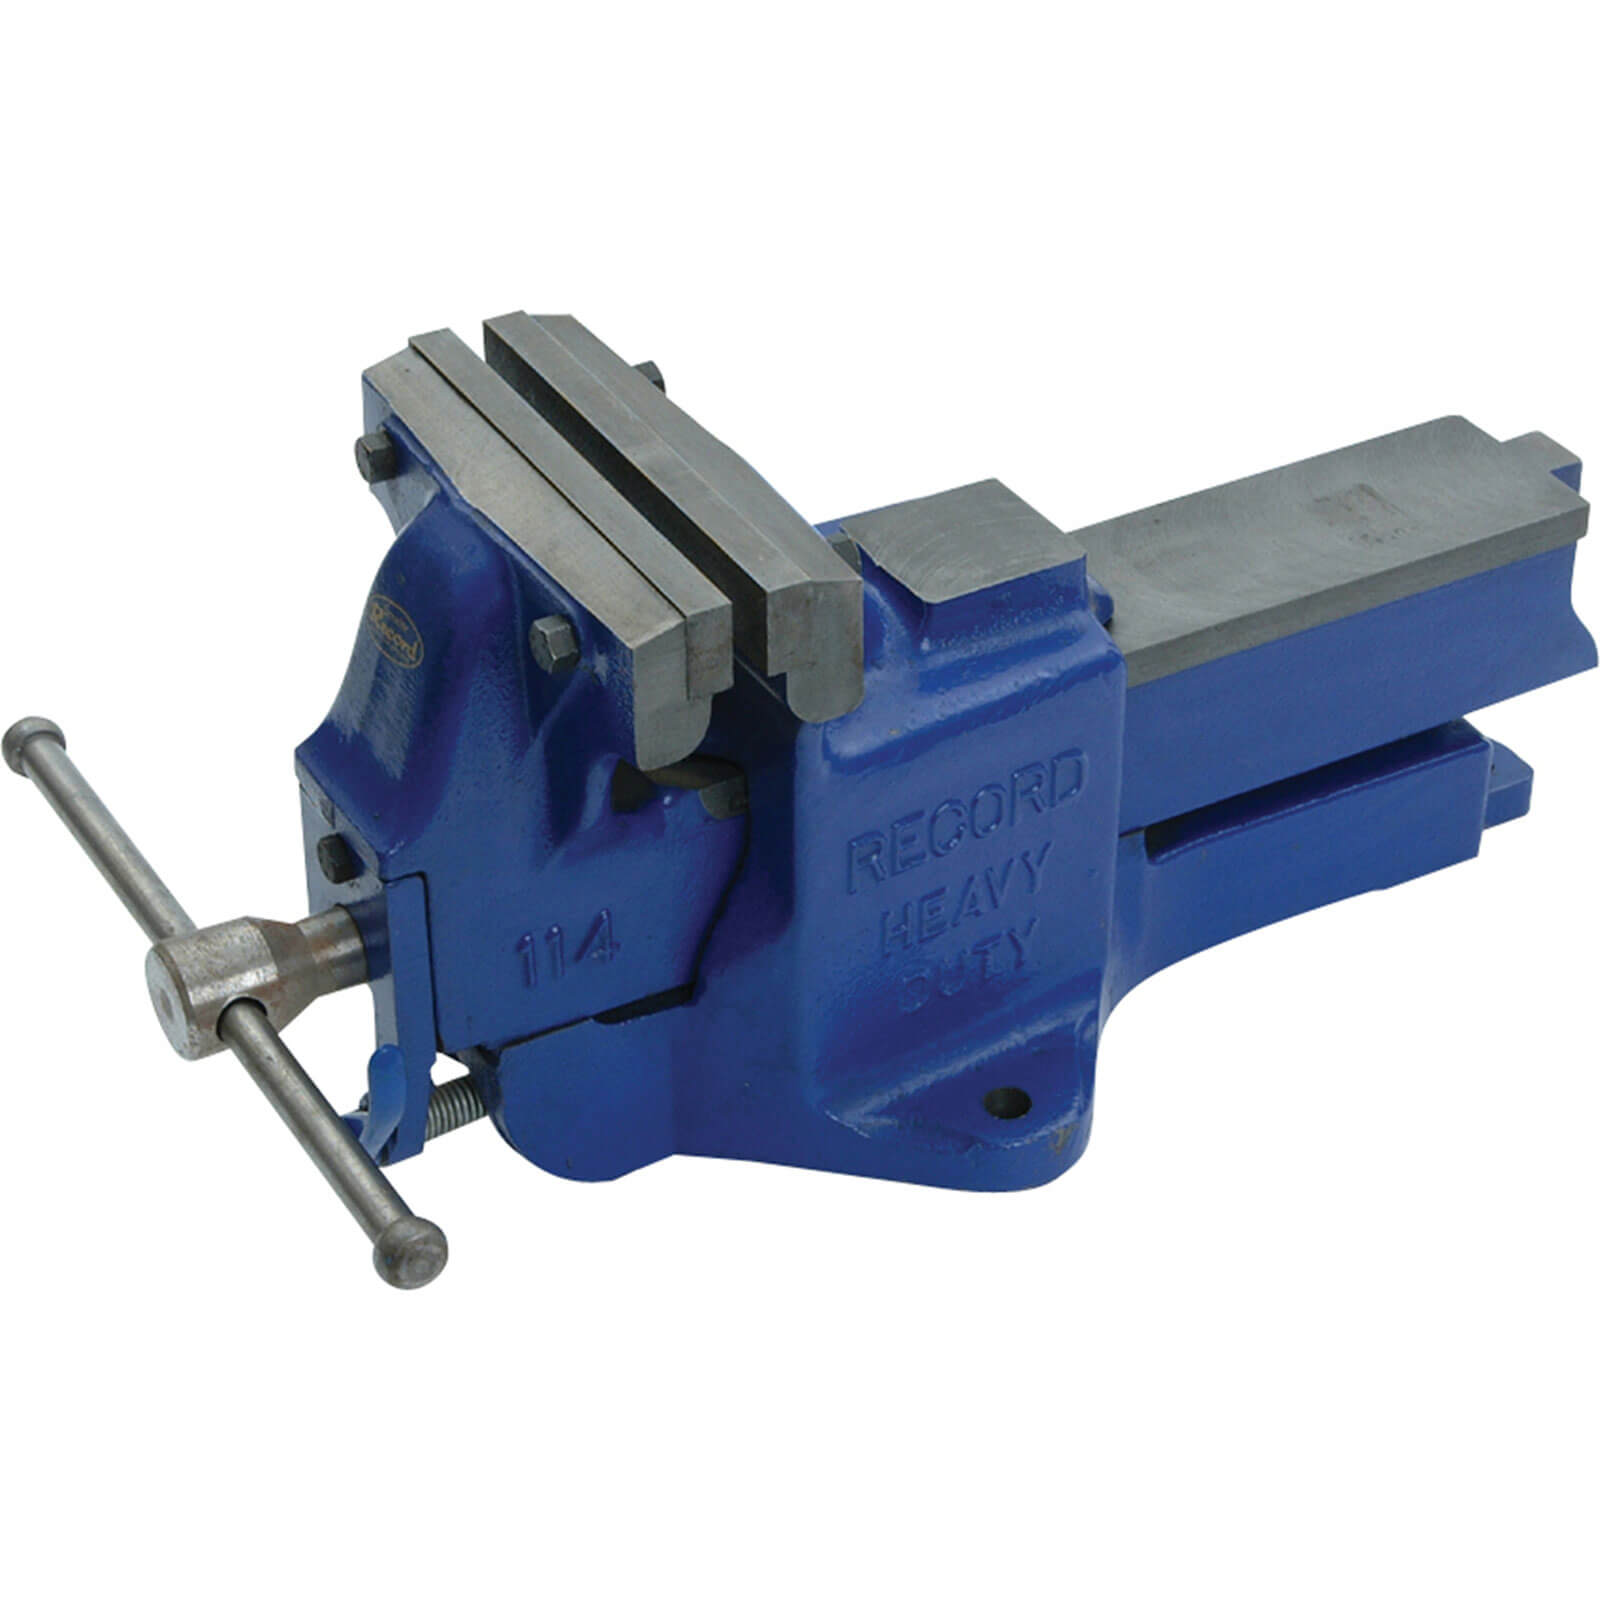 Photo of Irwin Record Engineers Heavy Duty Quick Release Vice 200mm